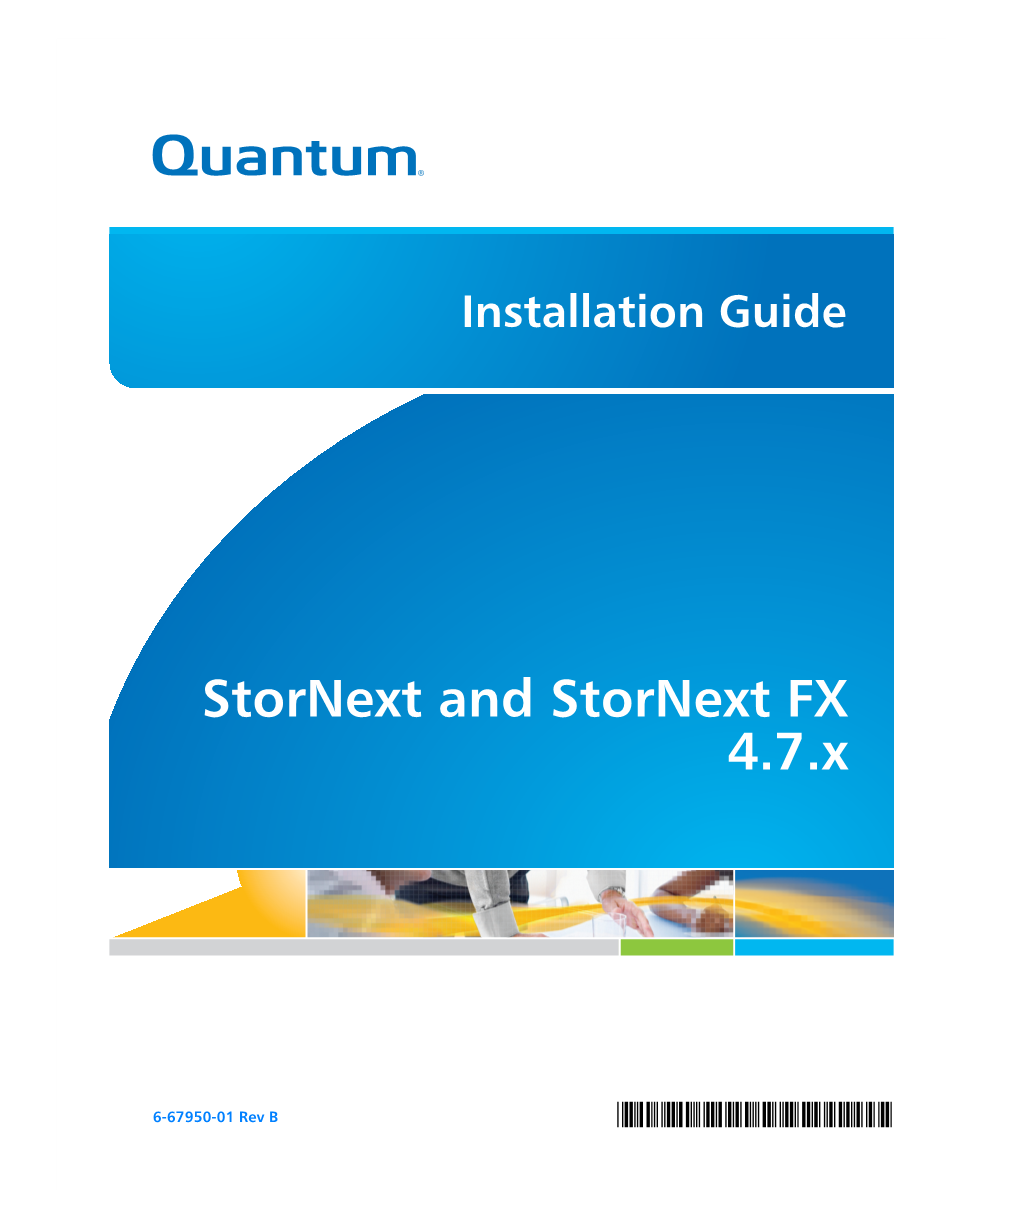 6-67950-01 Stornext and Stornext FX 4.7.X Installation Guide Rev B